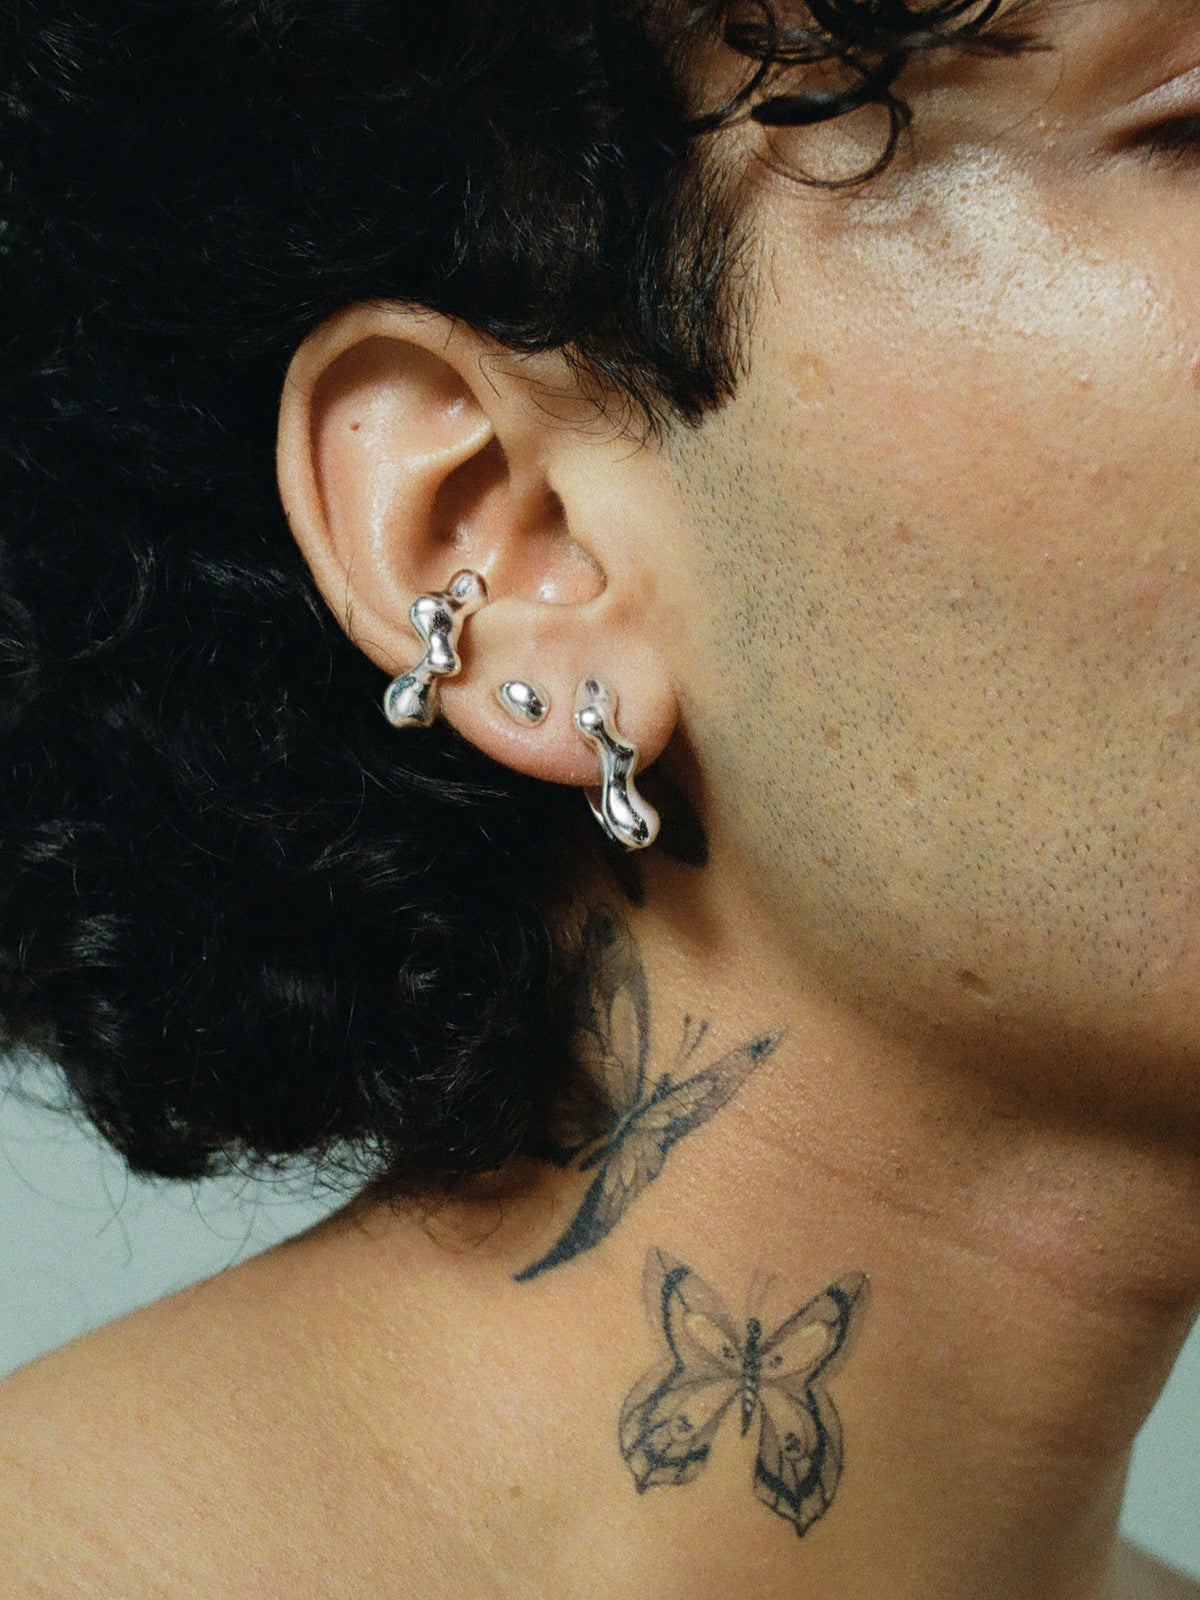 FARIS EGG GEM Stud in Sterling Silver with topaz shown on male model with butterfly tattoos on neck. Styled with SEEP Ear Cuff in Sterling Silver and SEEP Hoop Small in Sterling Silver.